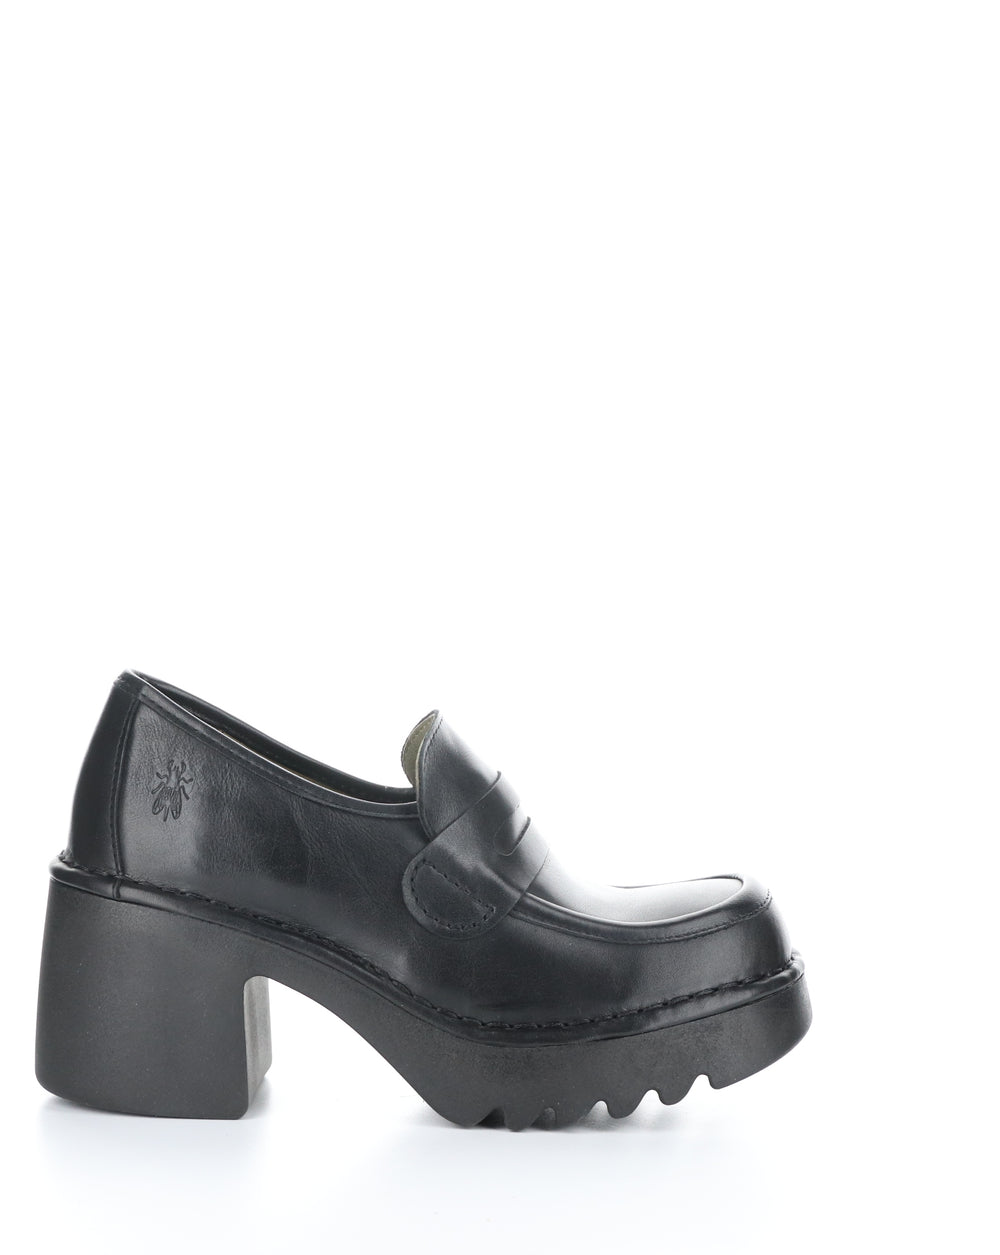 MULY252FLY 000 BLACK Slip-on Shoes